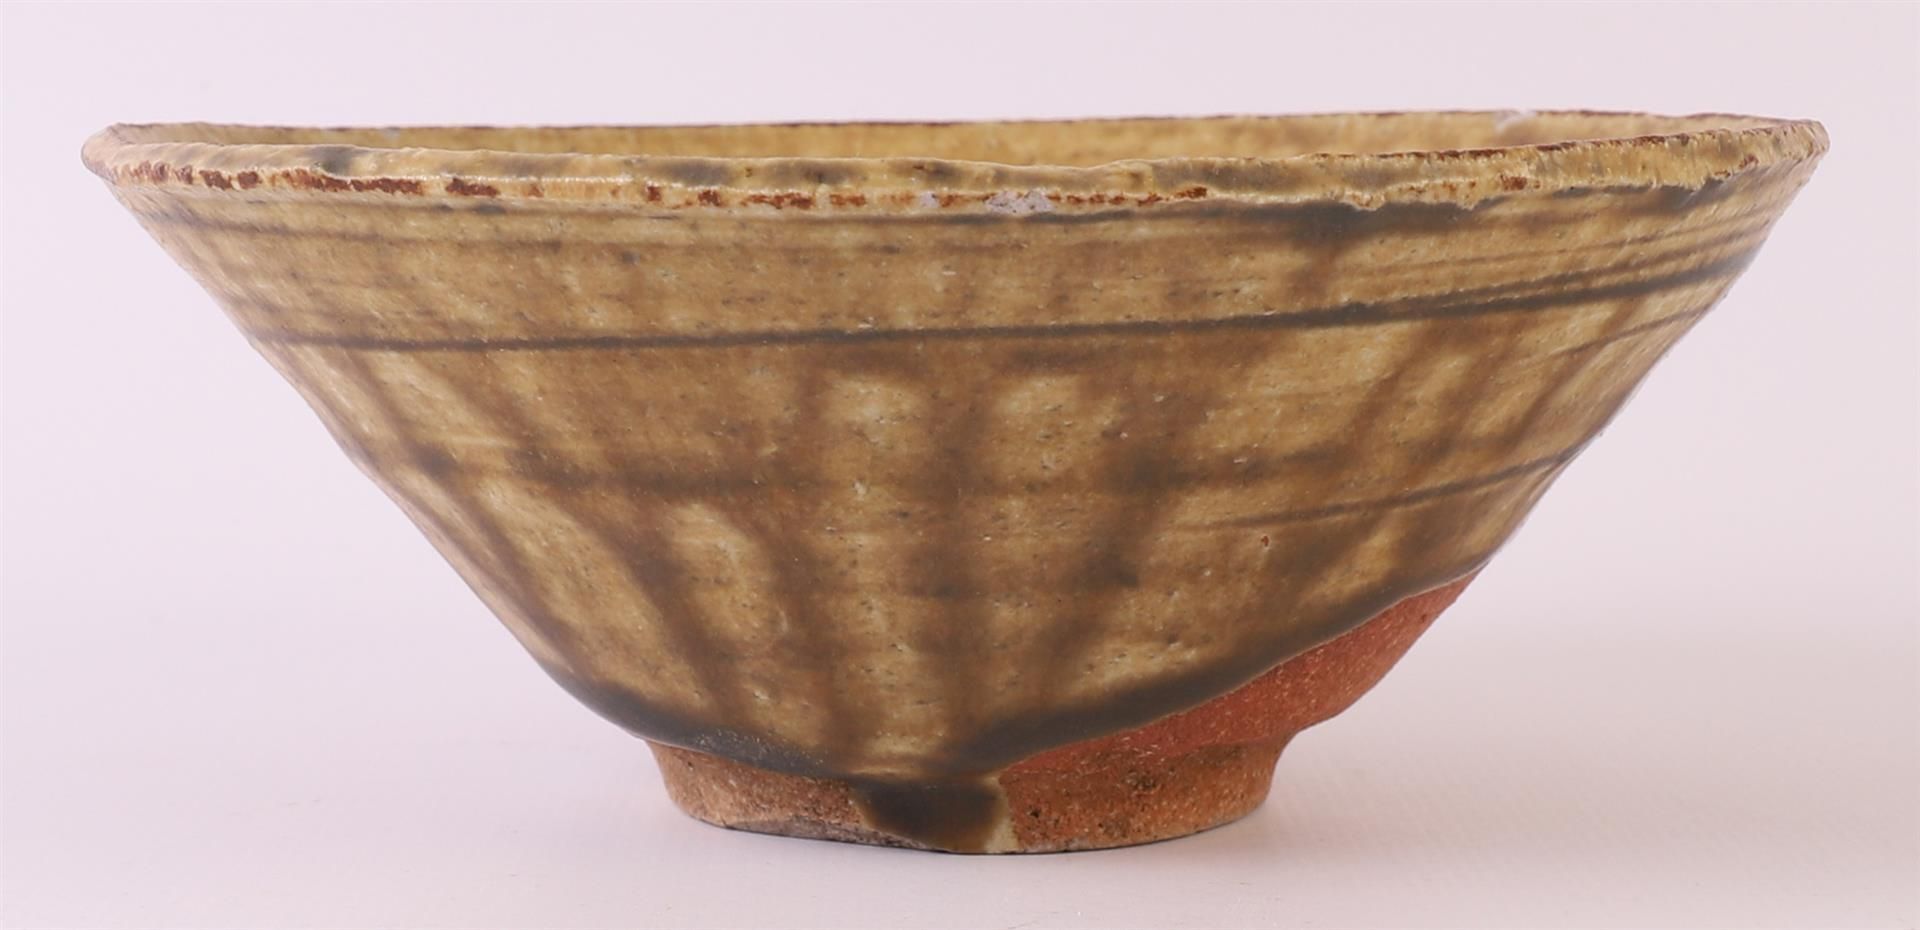 A brown glazed earthenware conical Temmoku bowl, China, Song dynasty - Image 2 of 8